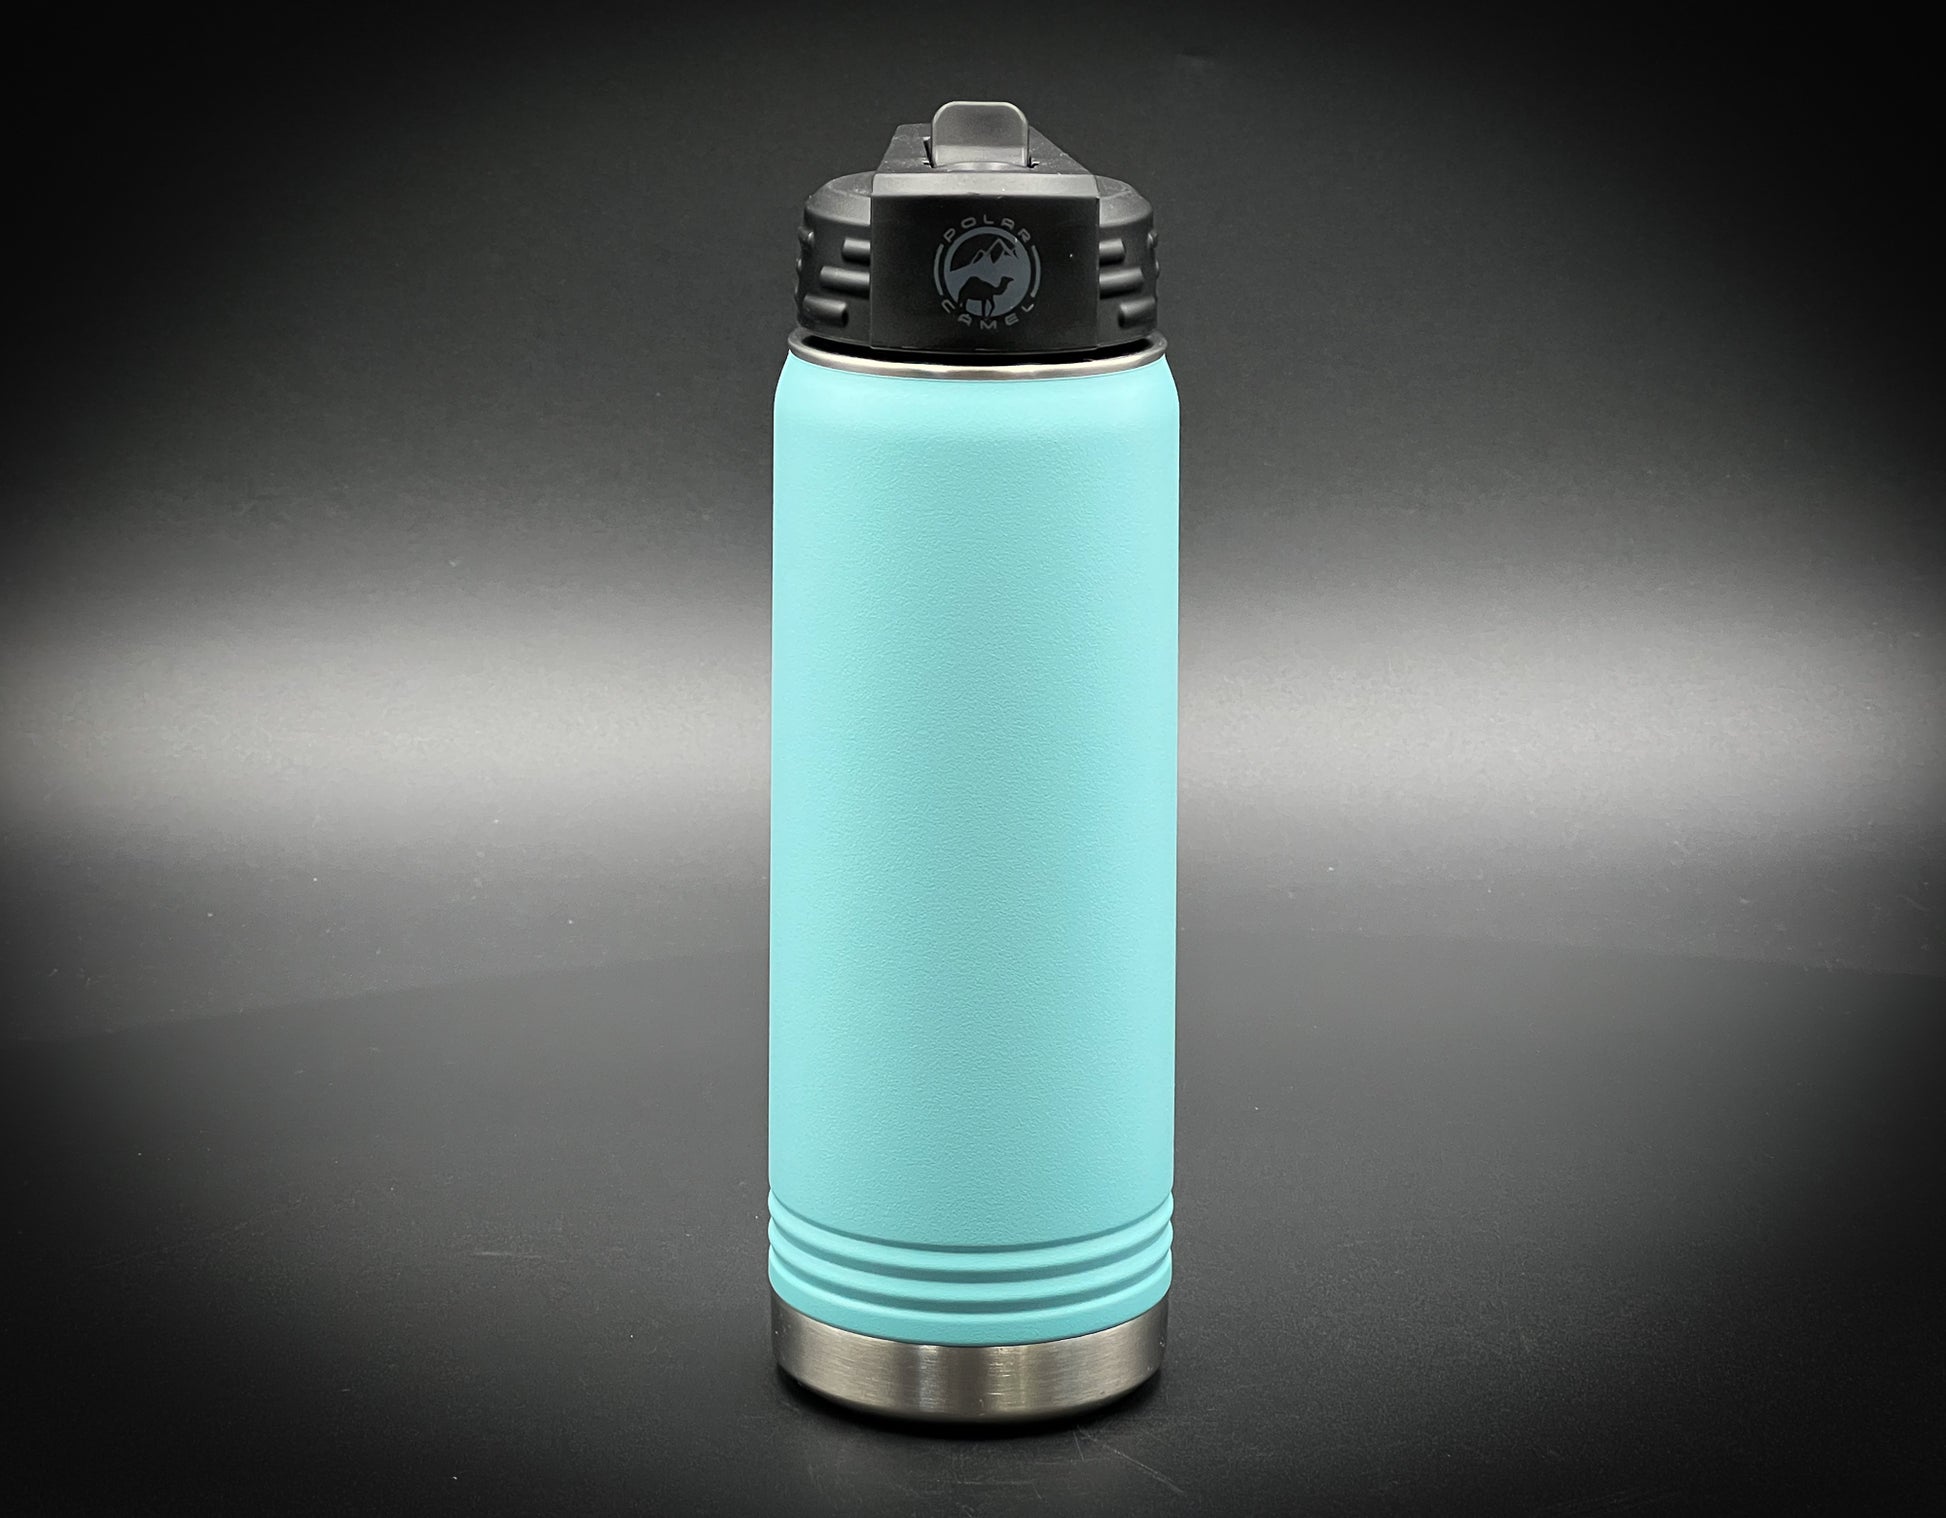 Save up to 50% off Hydro Flask tumblers that keep drinks cold for